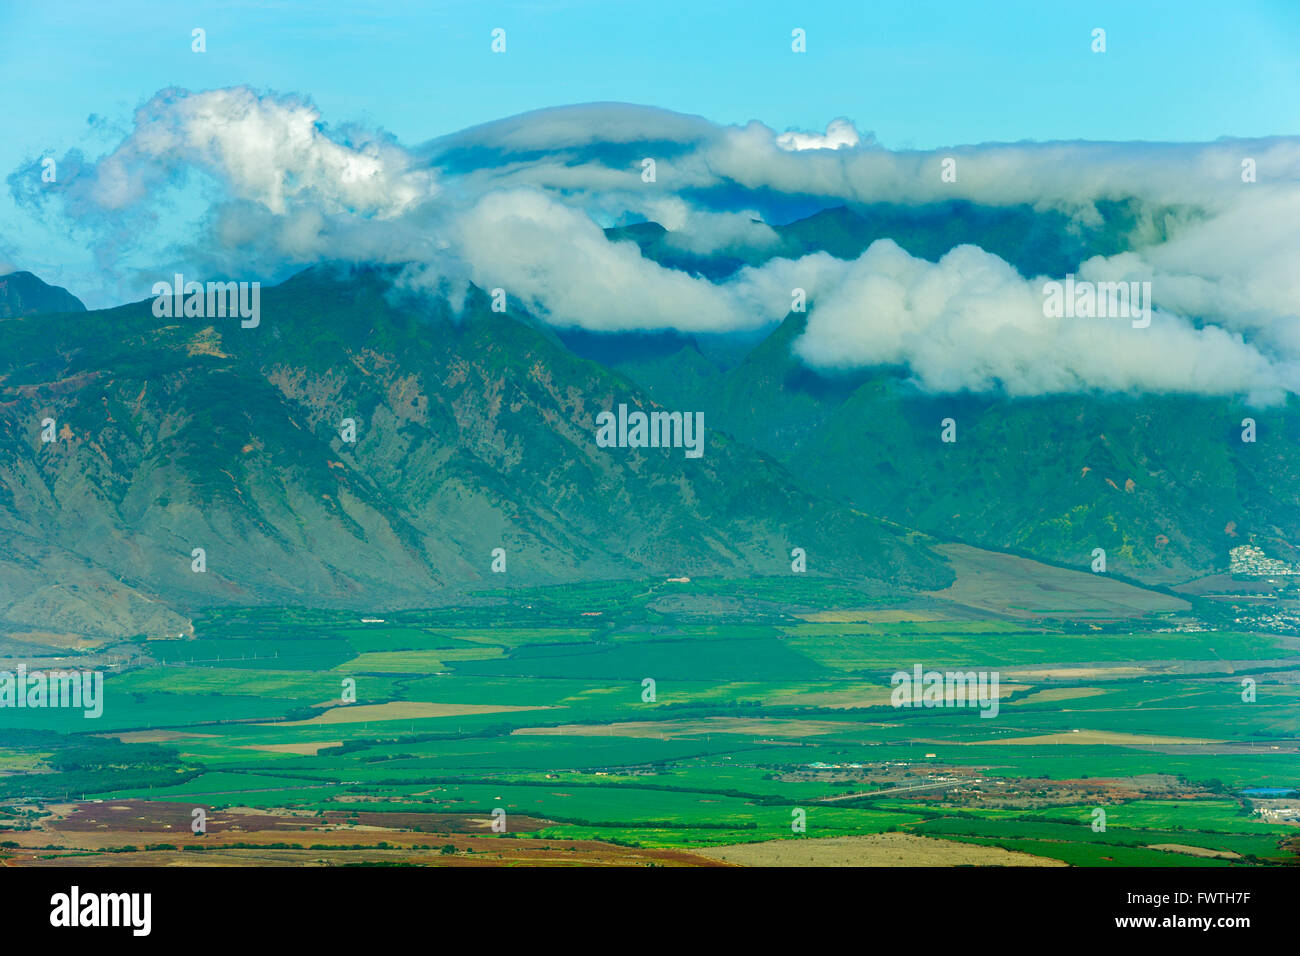 West Maui mountains and central Valley, Maui Stock Photo